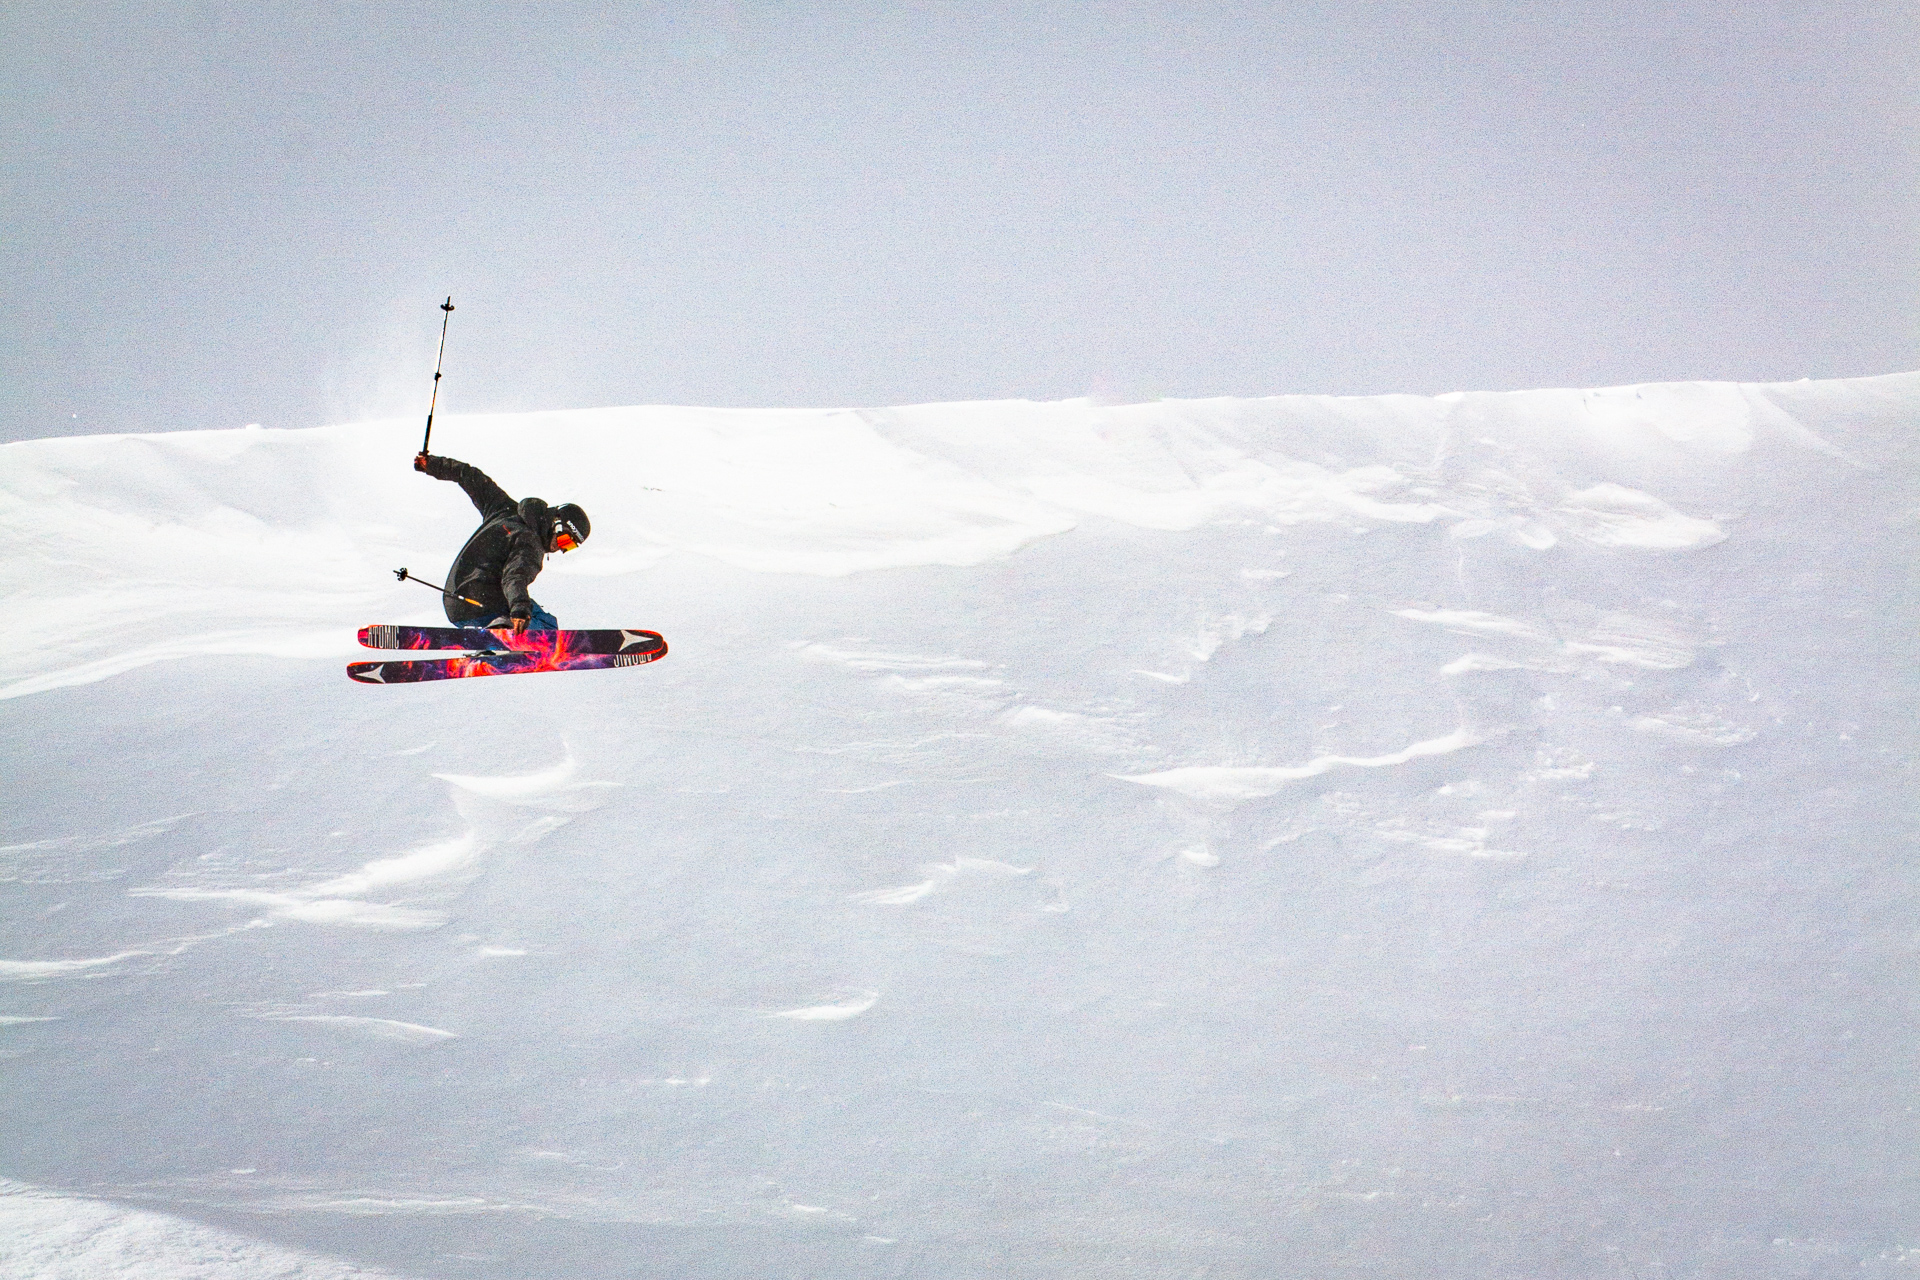 Kevin Brower with a classic 180 off a cornice near Niseko, Japan.